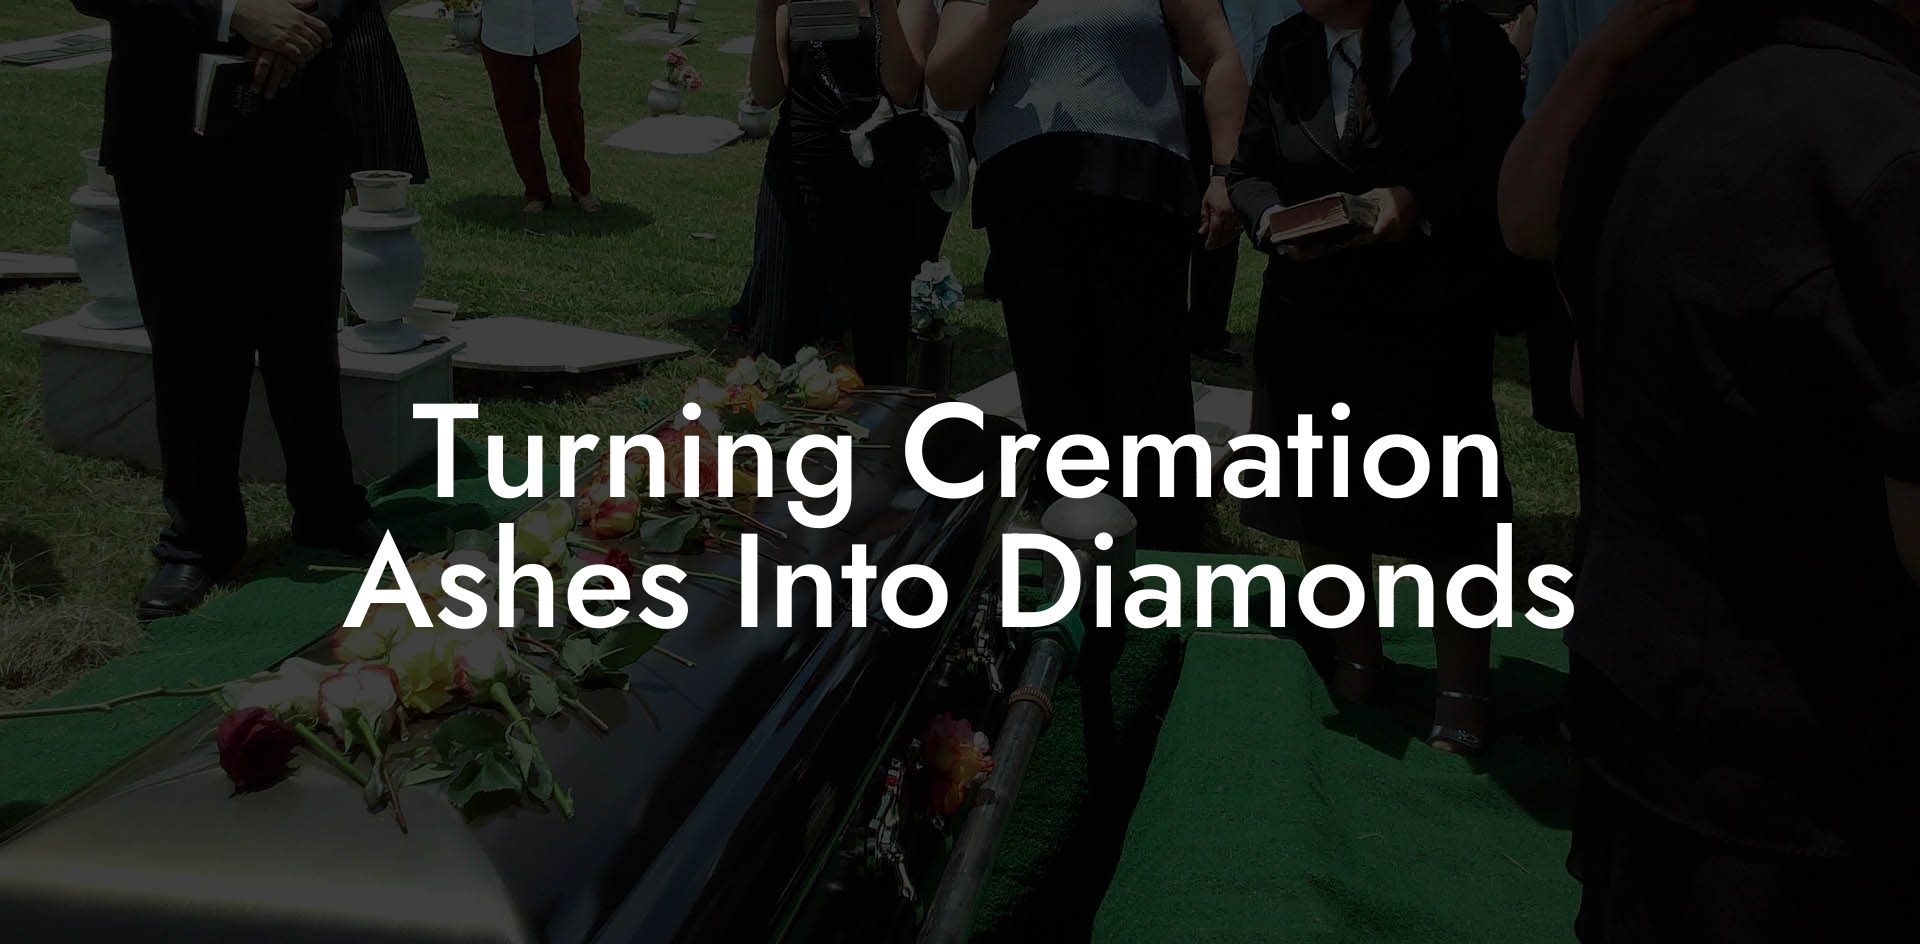 Turning Cremation Ashes Into Diamonds